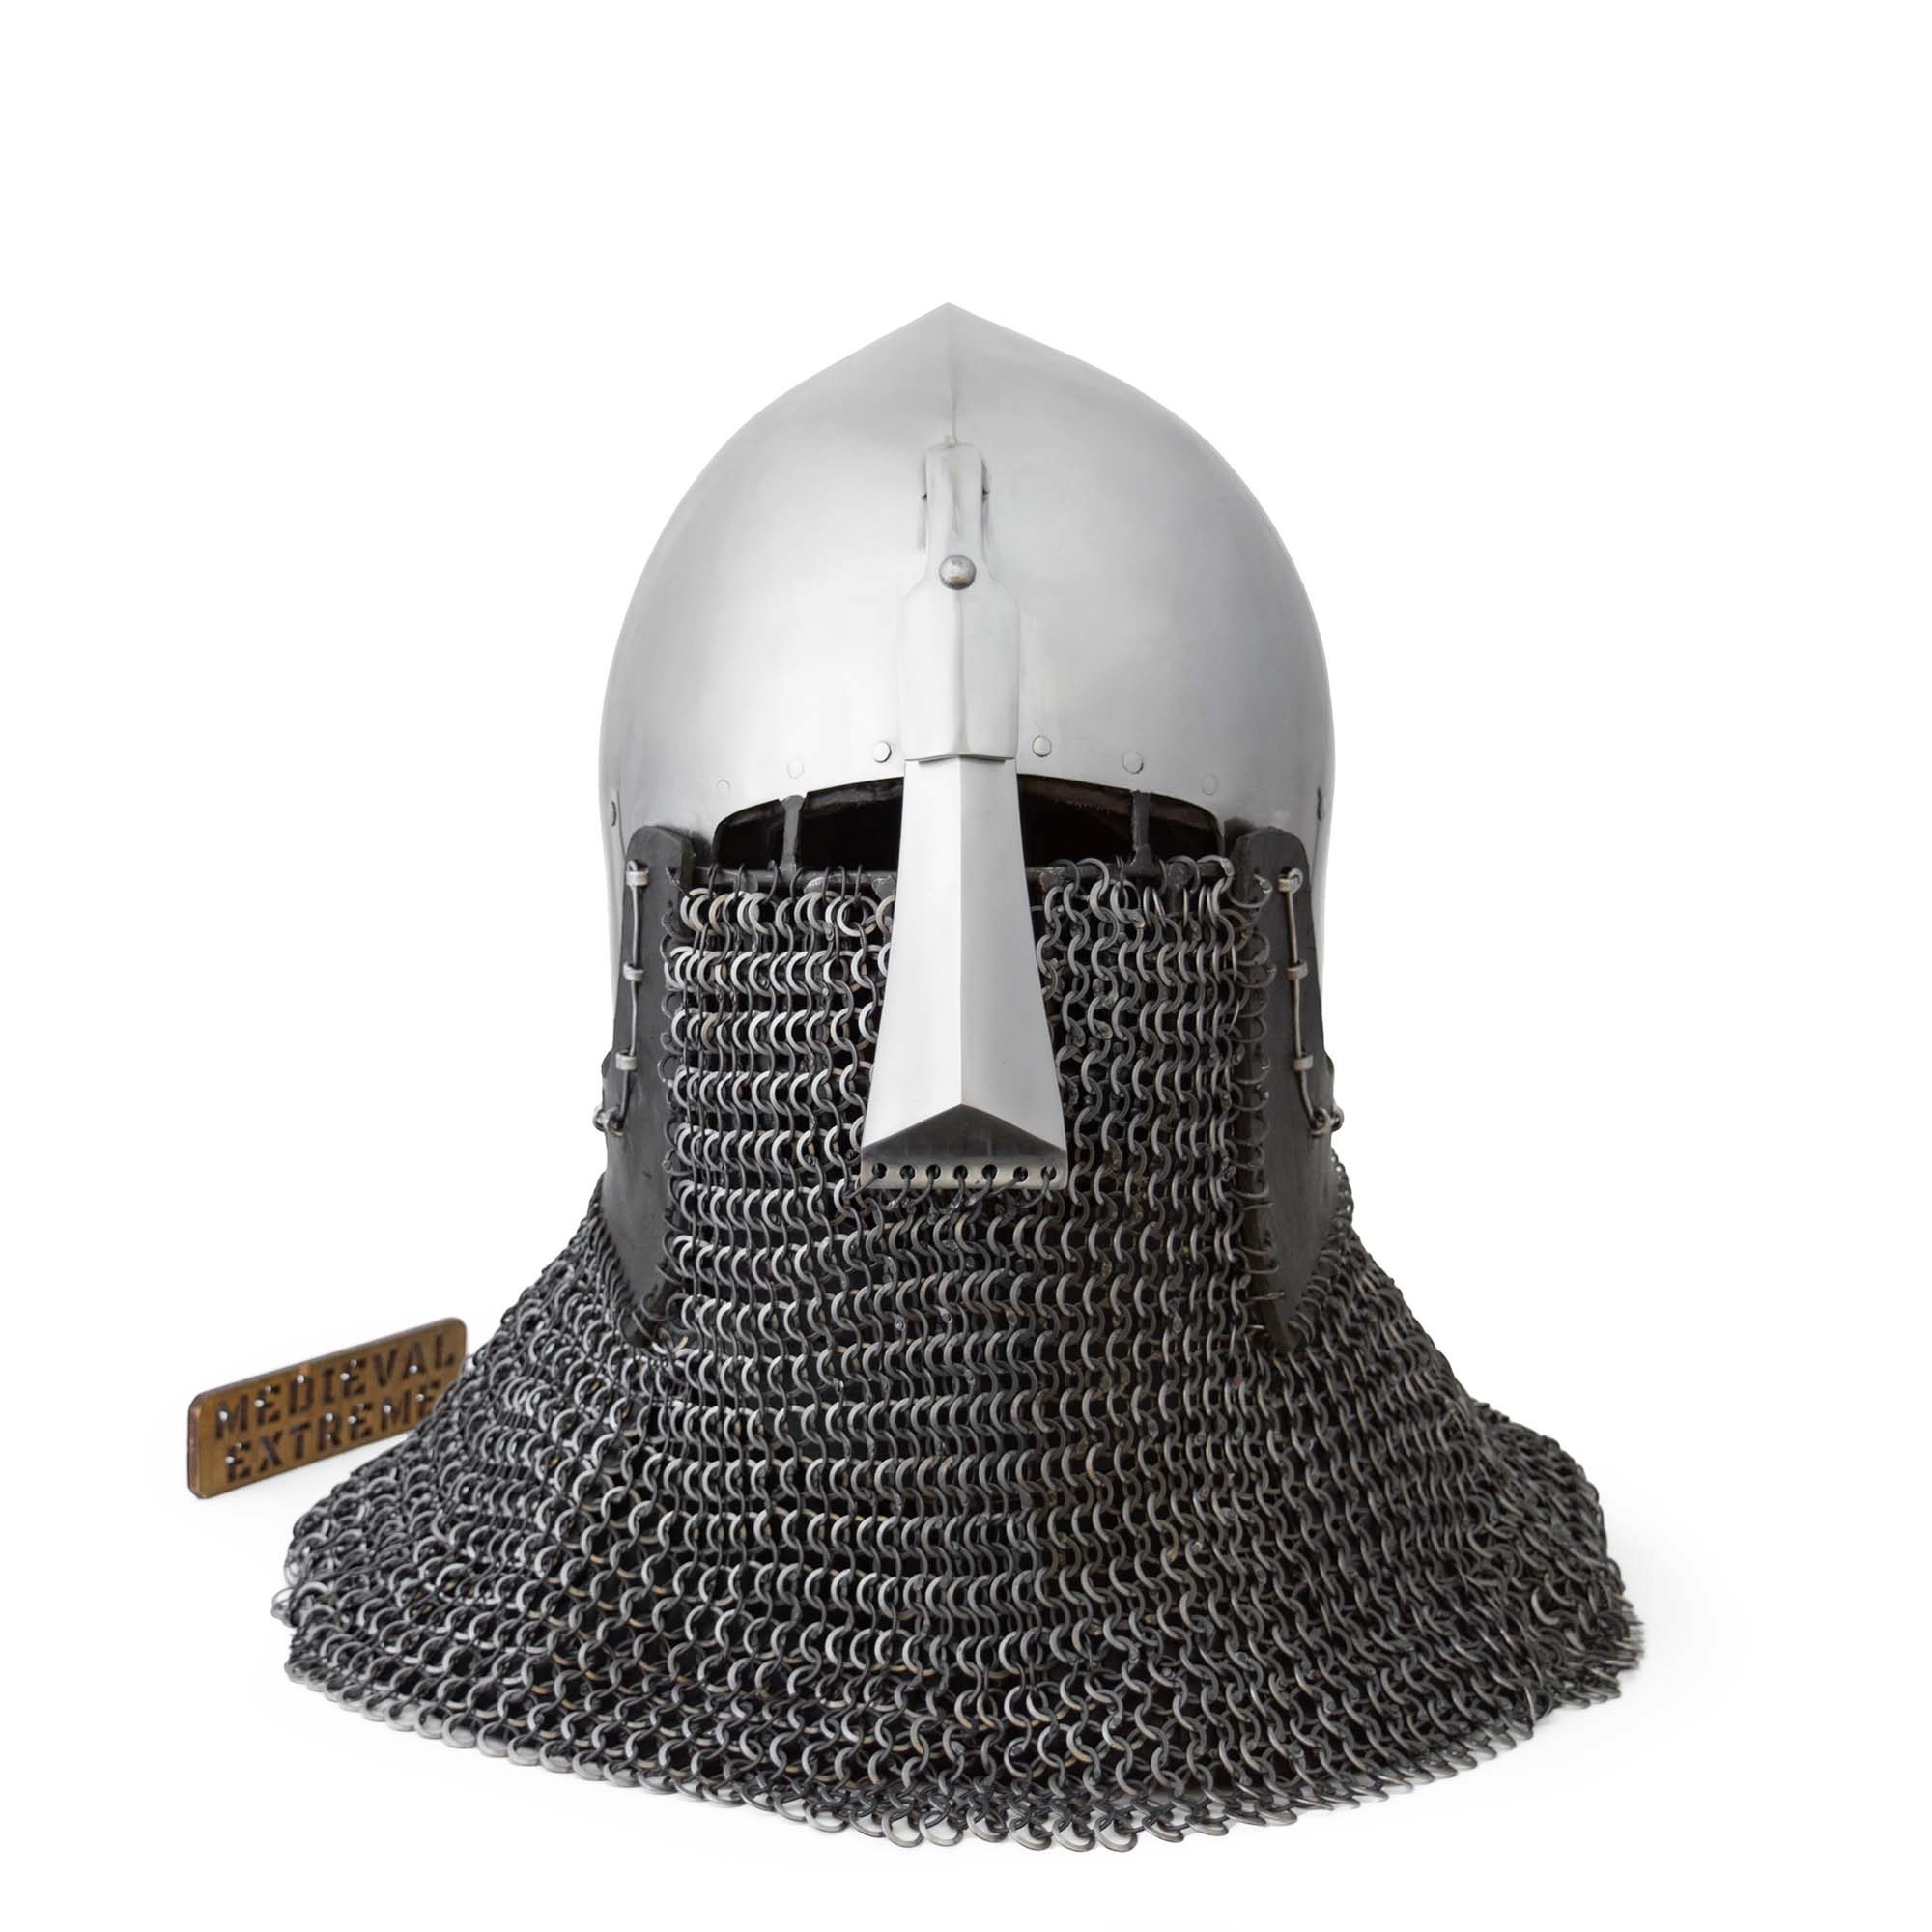 Nasal Bascinet for armored combat front of the helmet